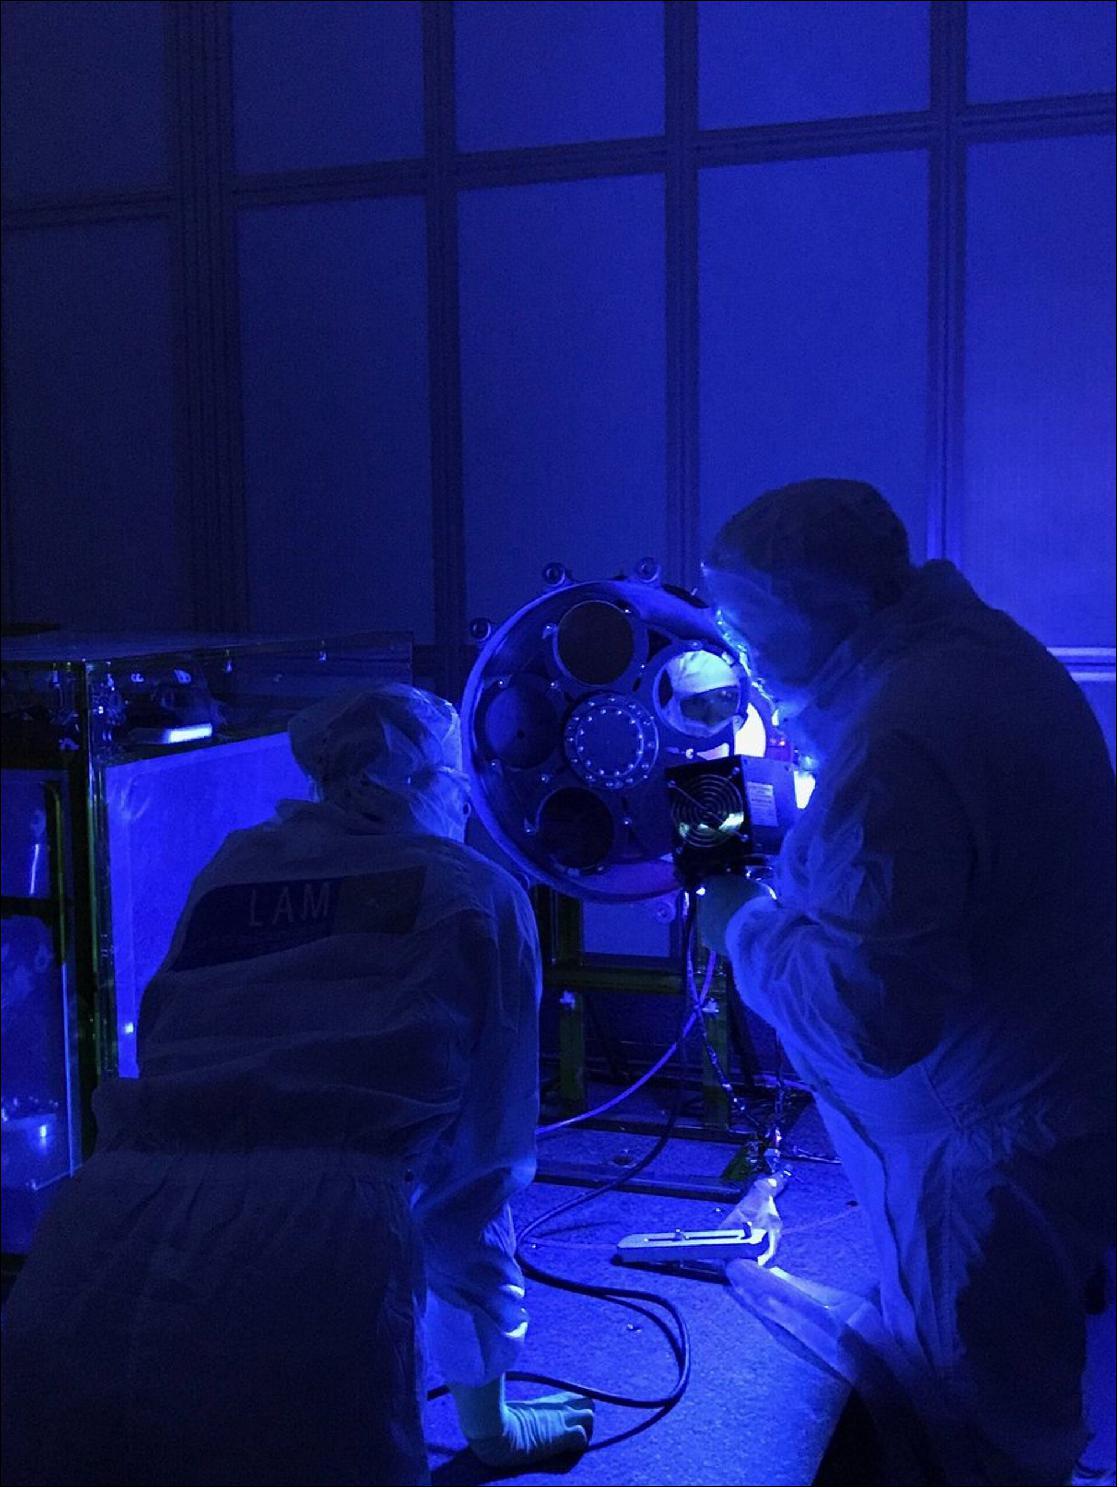 Figure 34: Technicians inspect the filter wheel of ESA’s Euclid mission’s NISP instrument. This component of NISP allows operators to select which wavelengths of infrared light are to be observed by the instrument (image credit: Euclid Consortium & NISP instrument team)